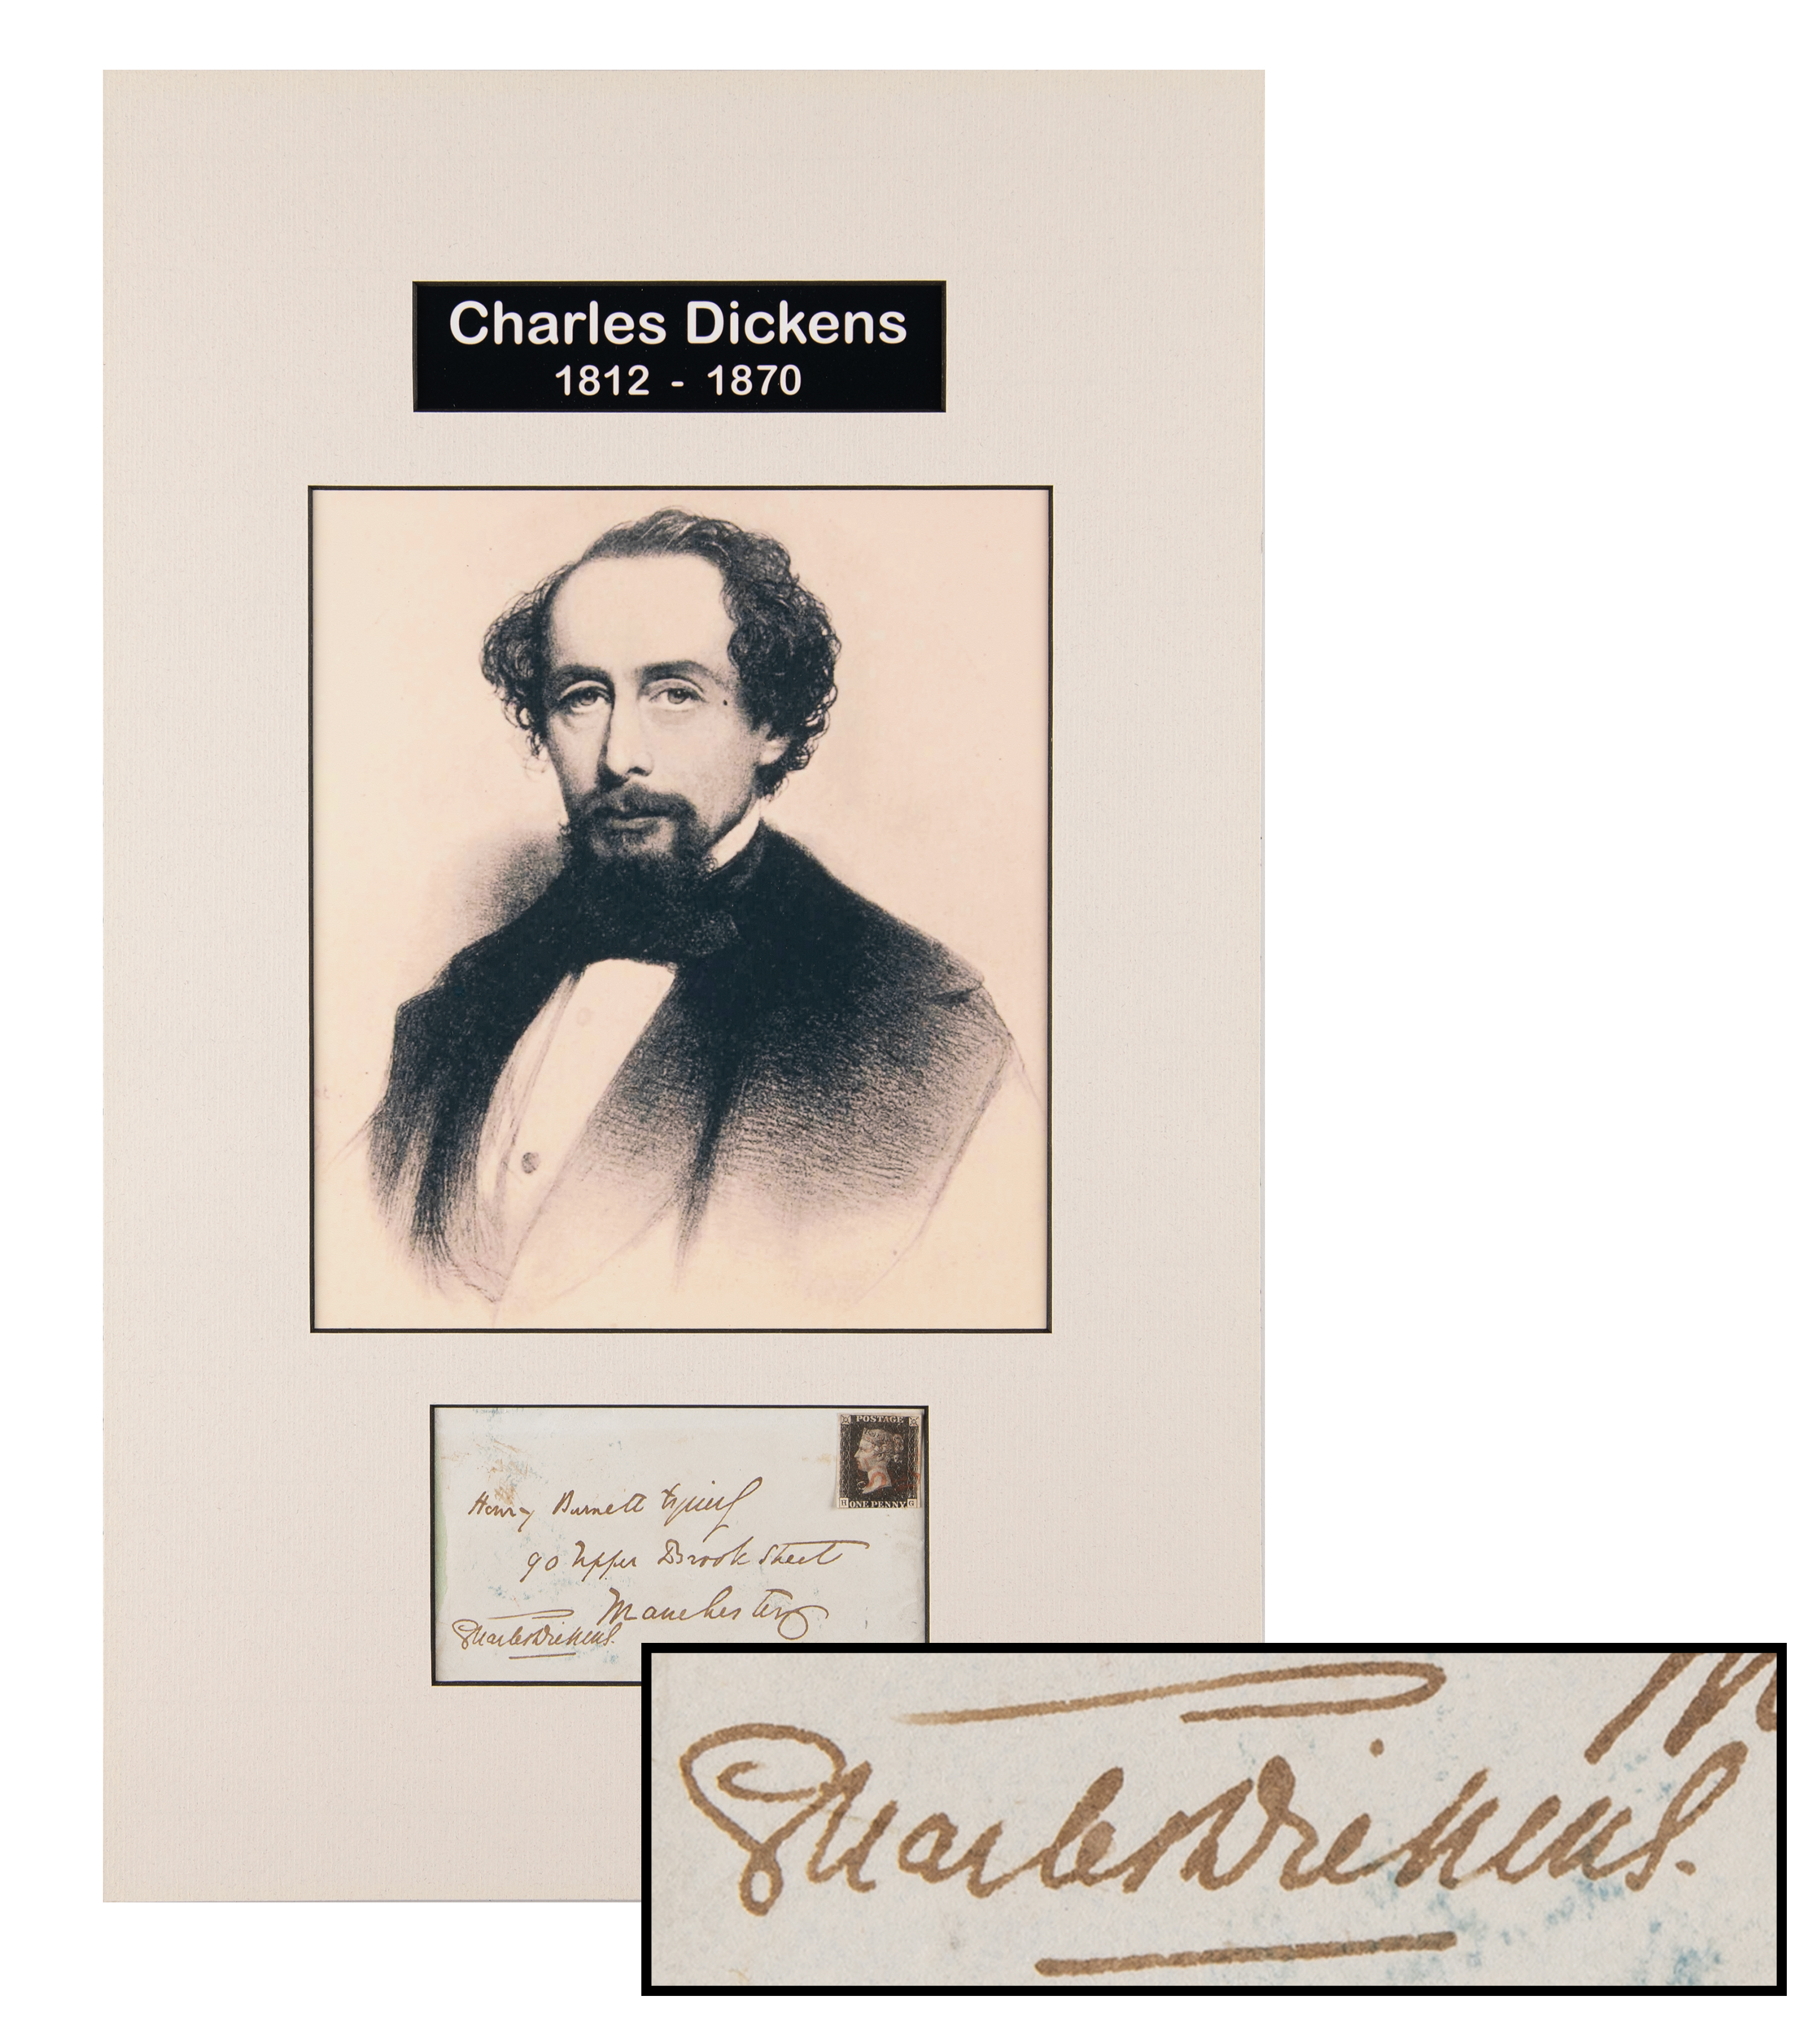 Lot #436 Charles Dickens Hand-Addressed Mailing